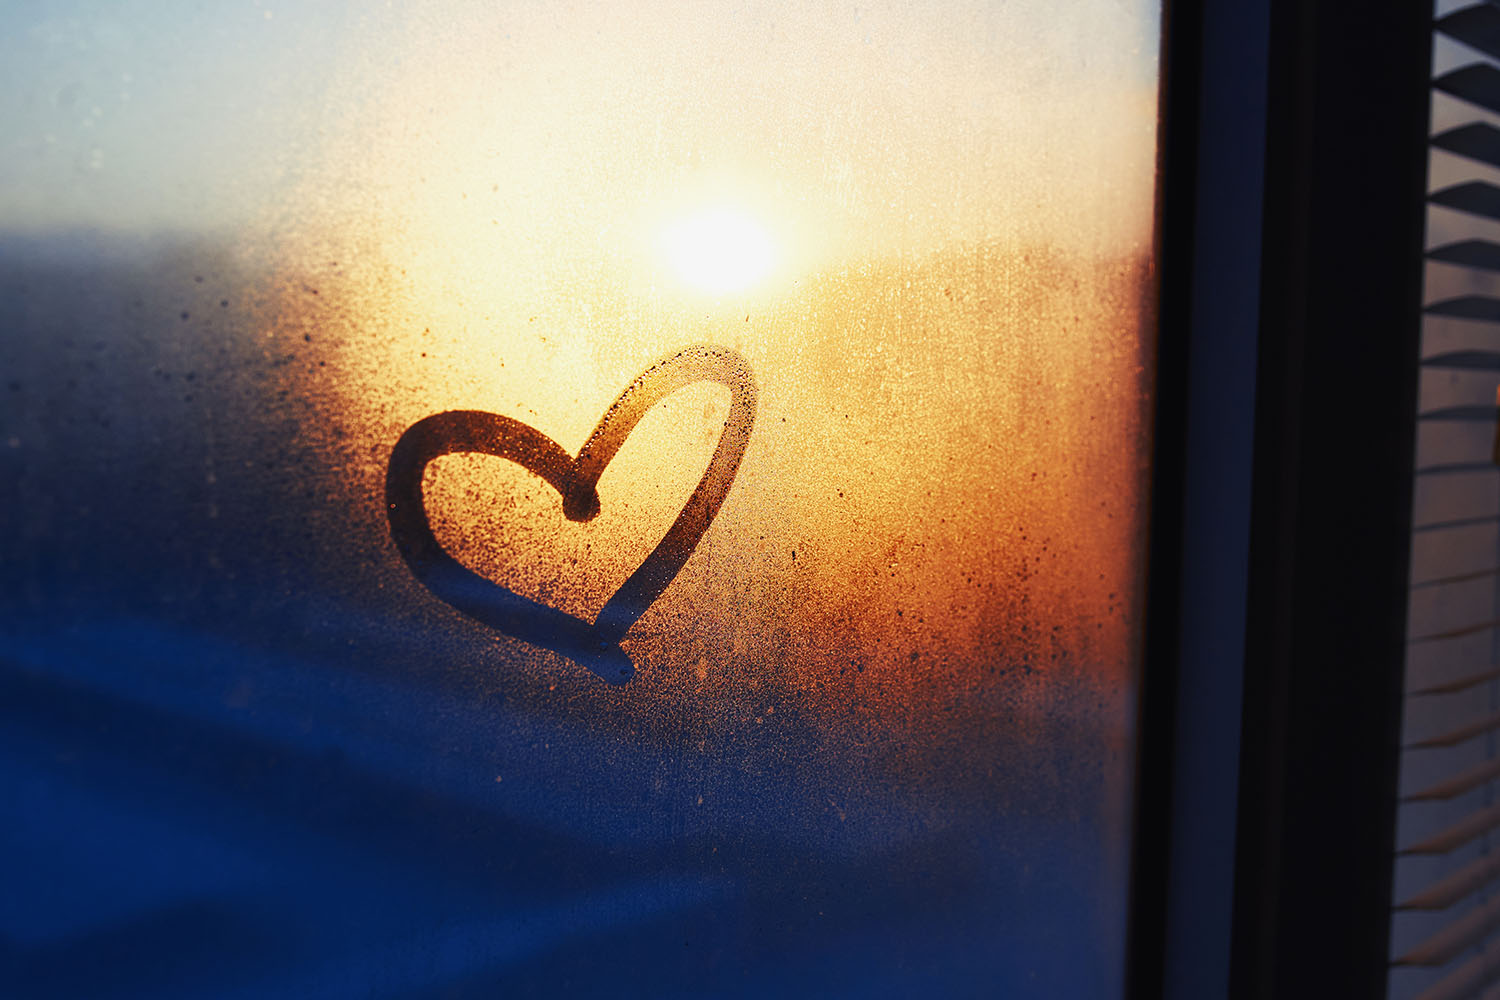 Heart drawn on a misty window and sunset on the background